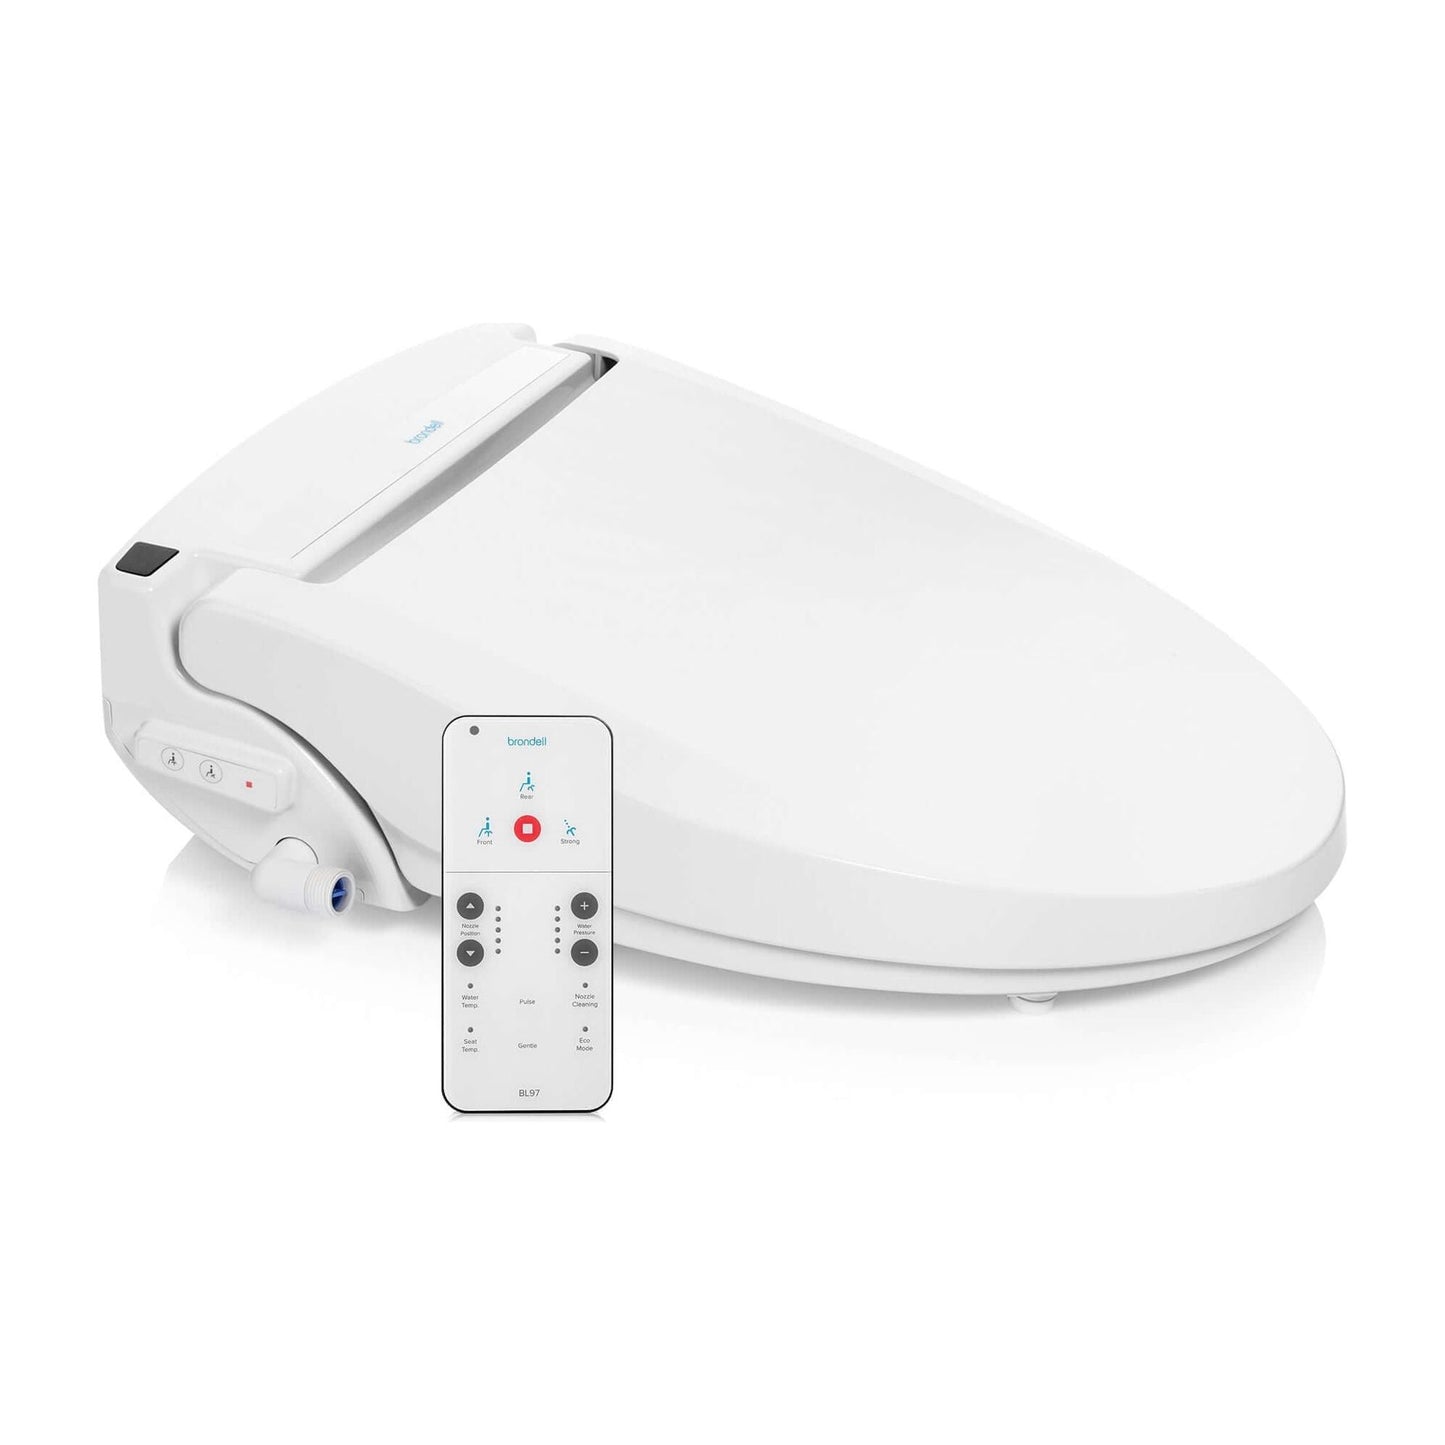 Swash Select BL97 Bidet Seat - side angled view with remote control